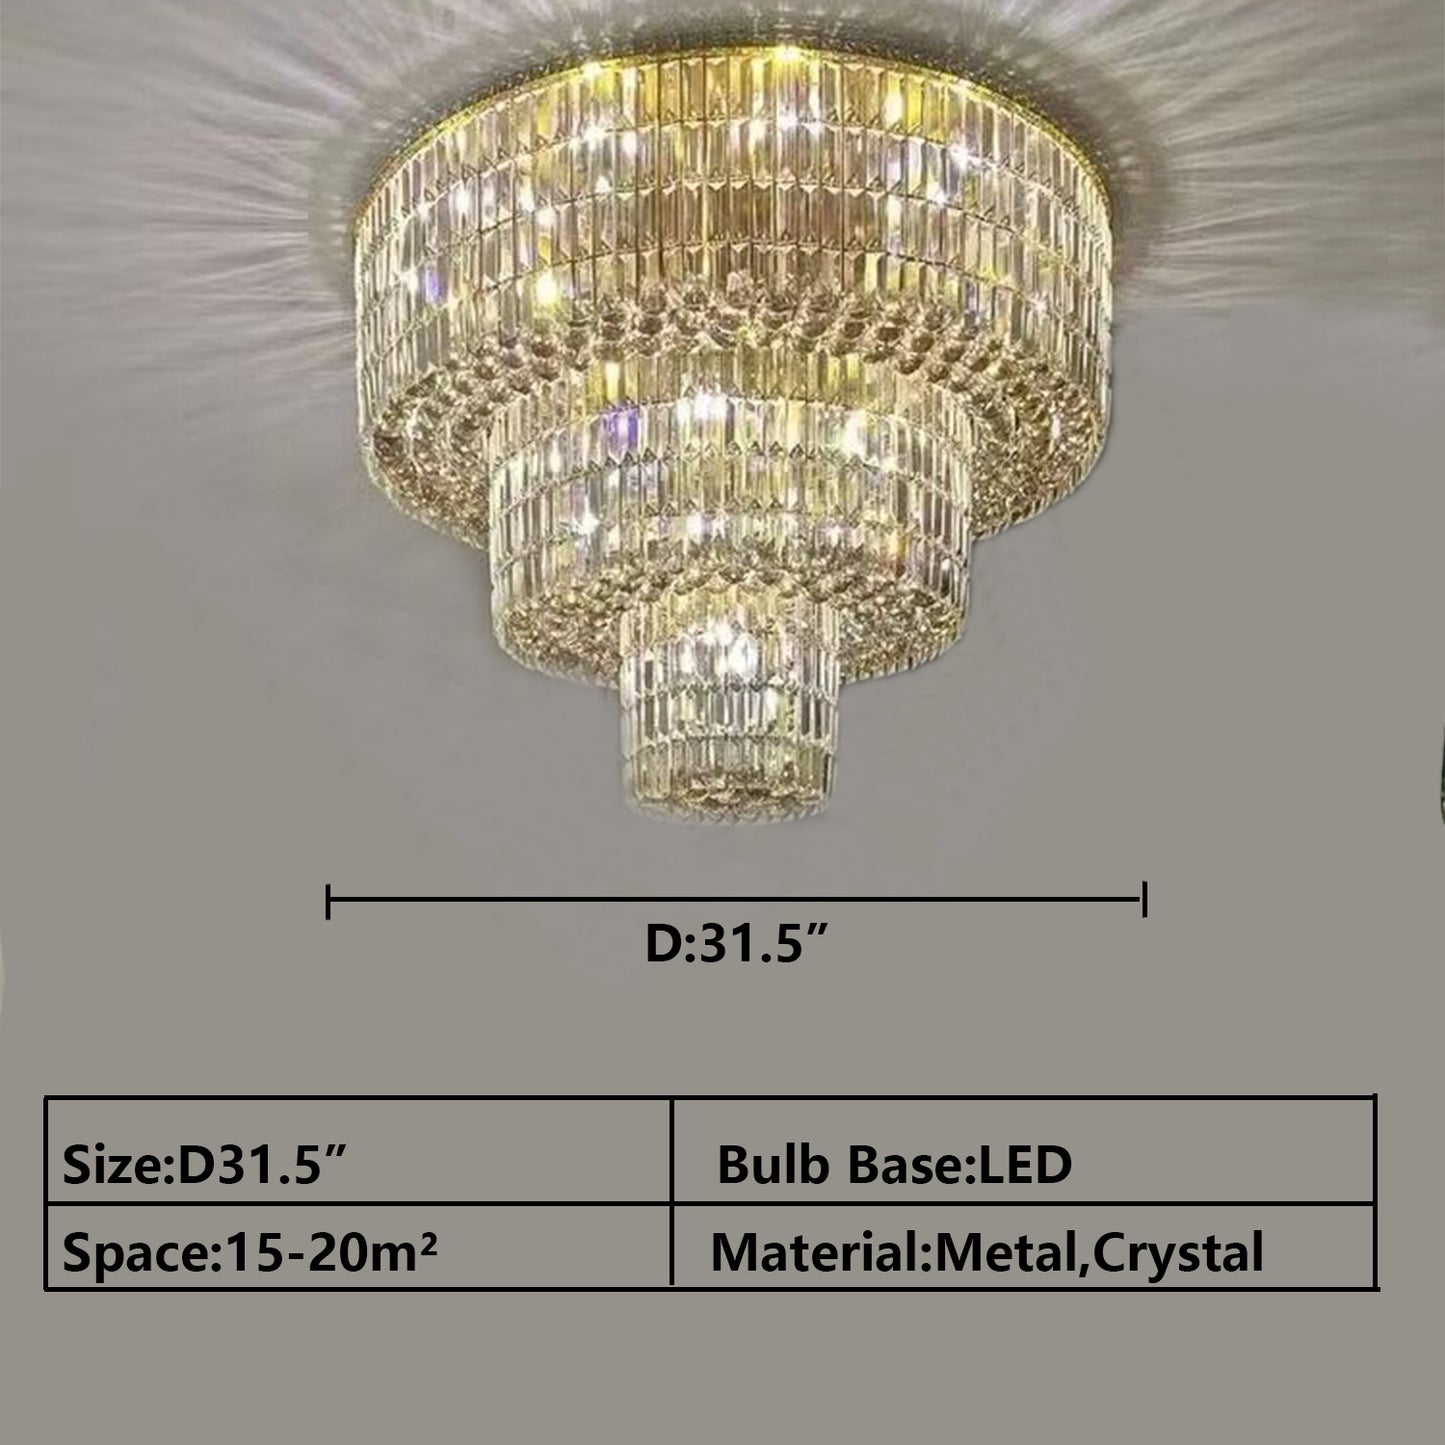 D31.5" chandelier,chandeliers,pendant,flush mount,ceiling,tiers,layers,multi-tier,multi-layer,round,metal,crystal,dold,luxury,light luxury,living room,dining room,entrys,foyers,hallway